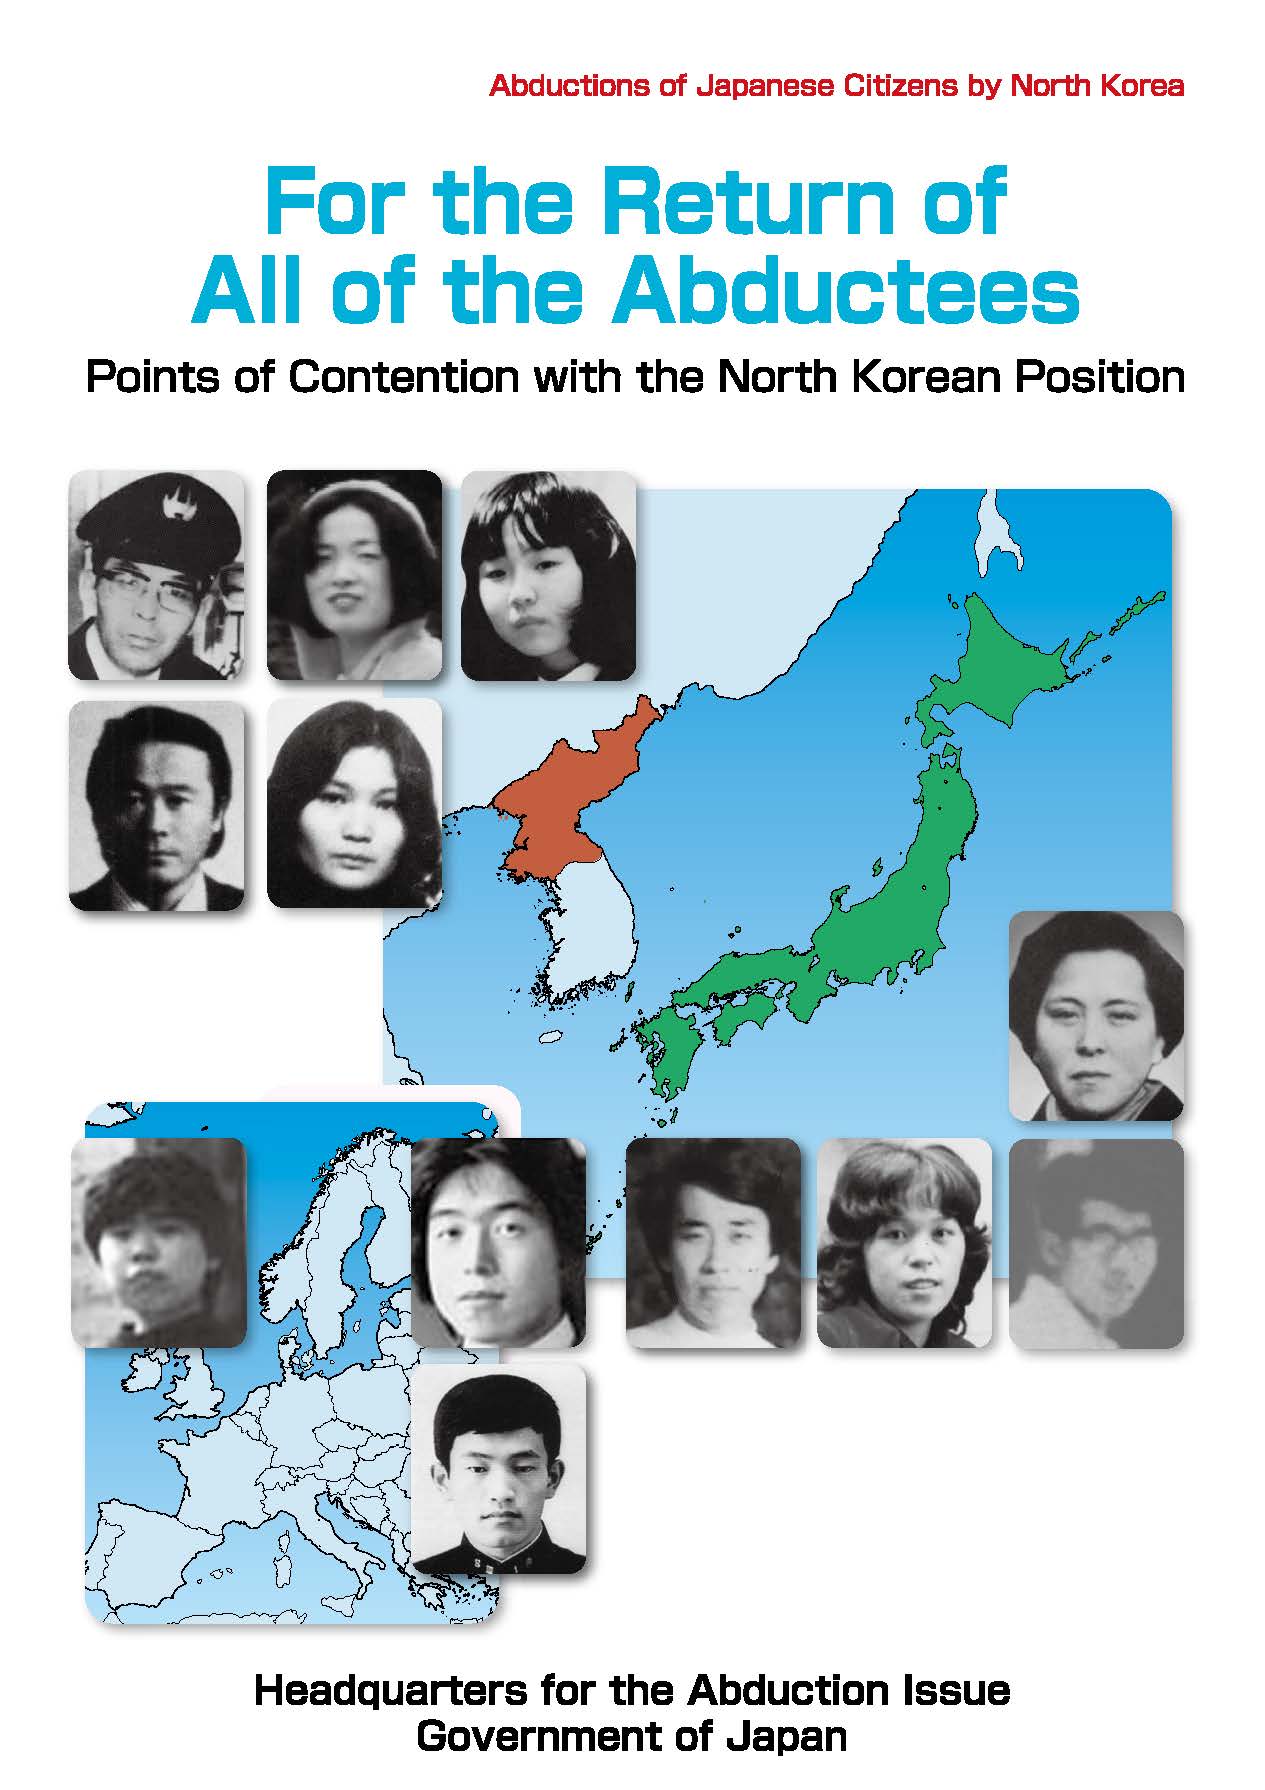 Government of Japan cover of pamphlet describing the abduction of Japanese citizens by North Korea.